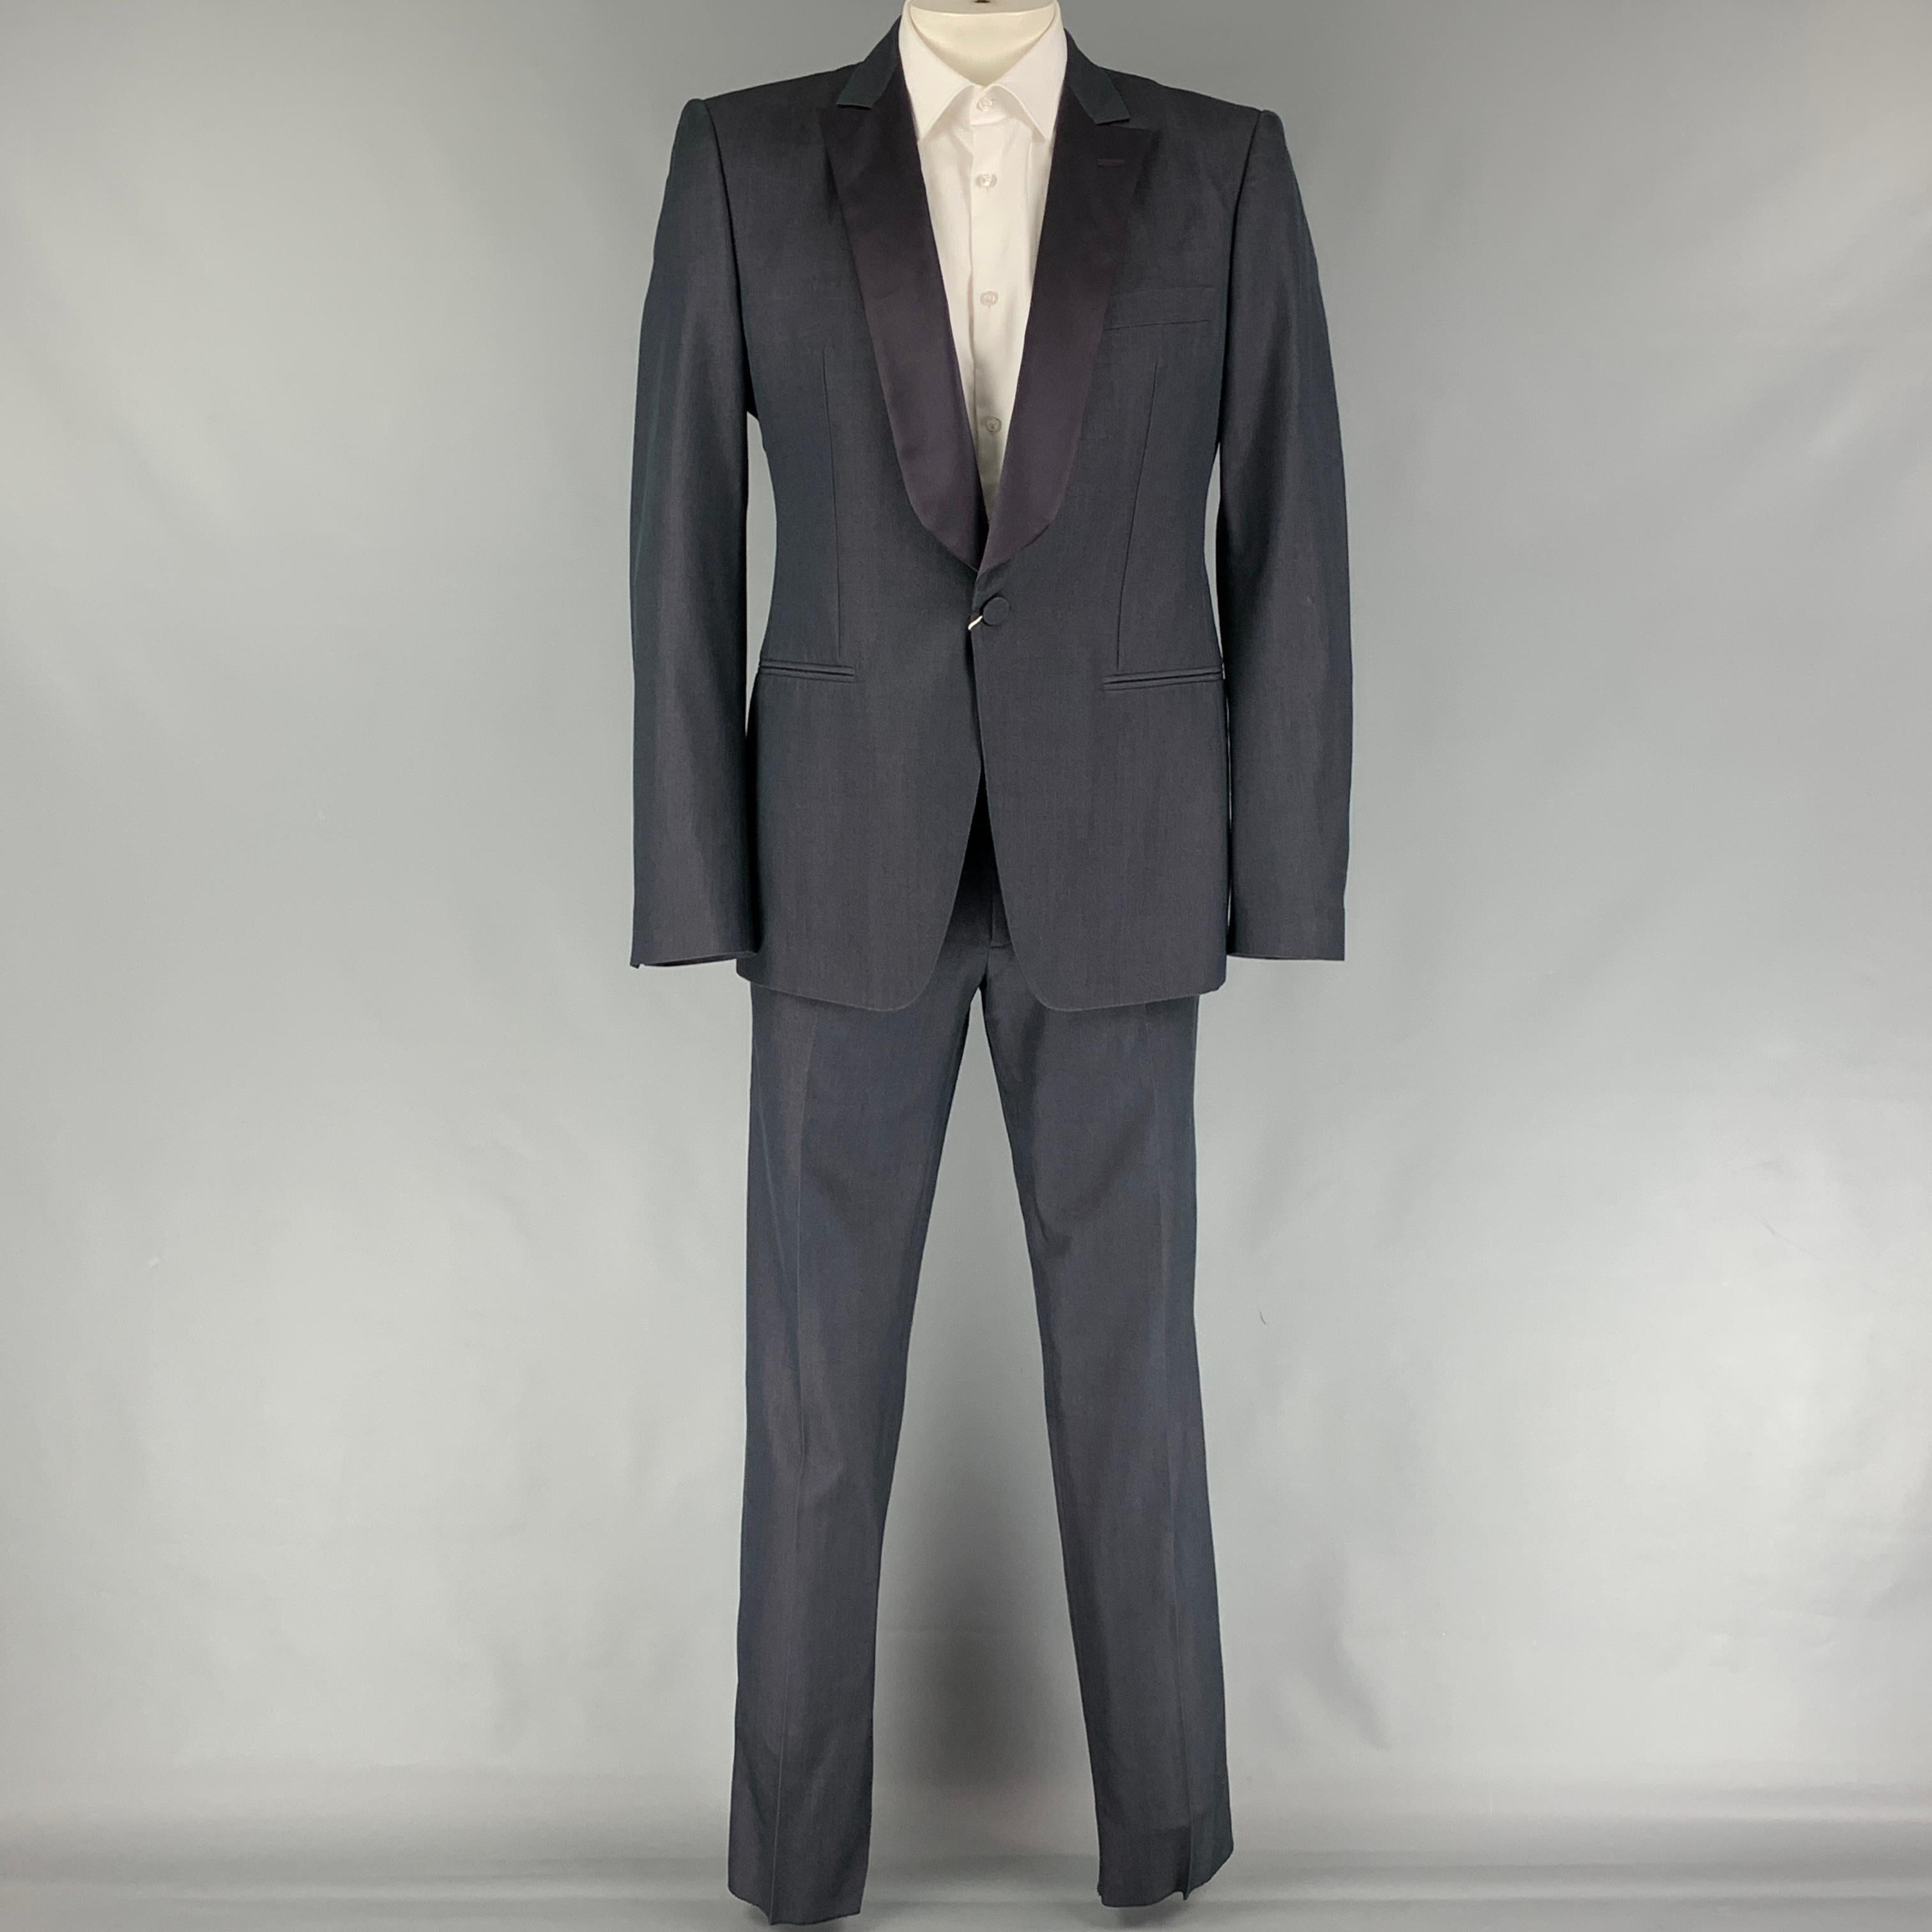 VIKTOR & ROLF tuxedo suit comes in a charcoal silk / wool and includes a single breasted, single button sport coat with notch lapel and matching flat front trousers. Made in Italy.

Very Good Pre-Owned Condition.
Marked: